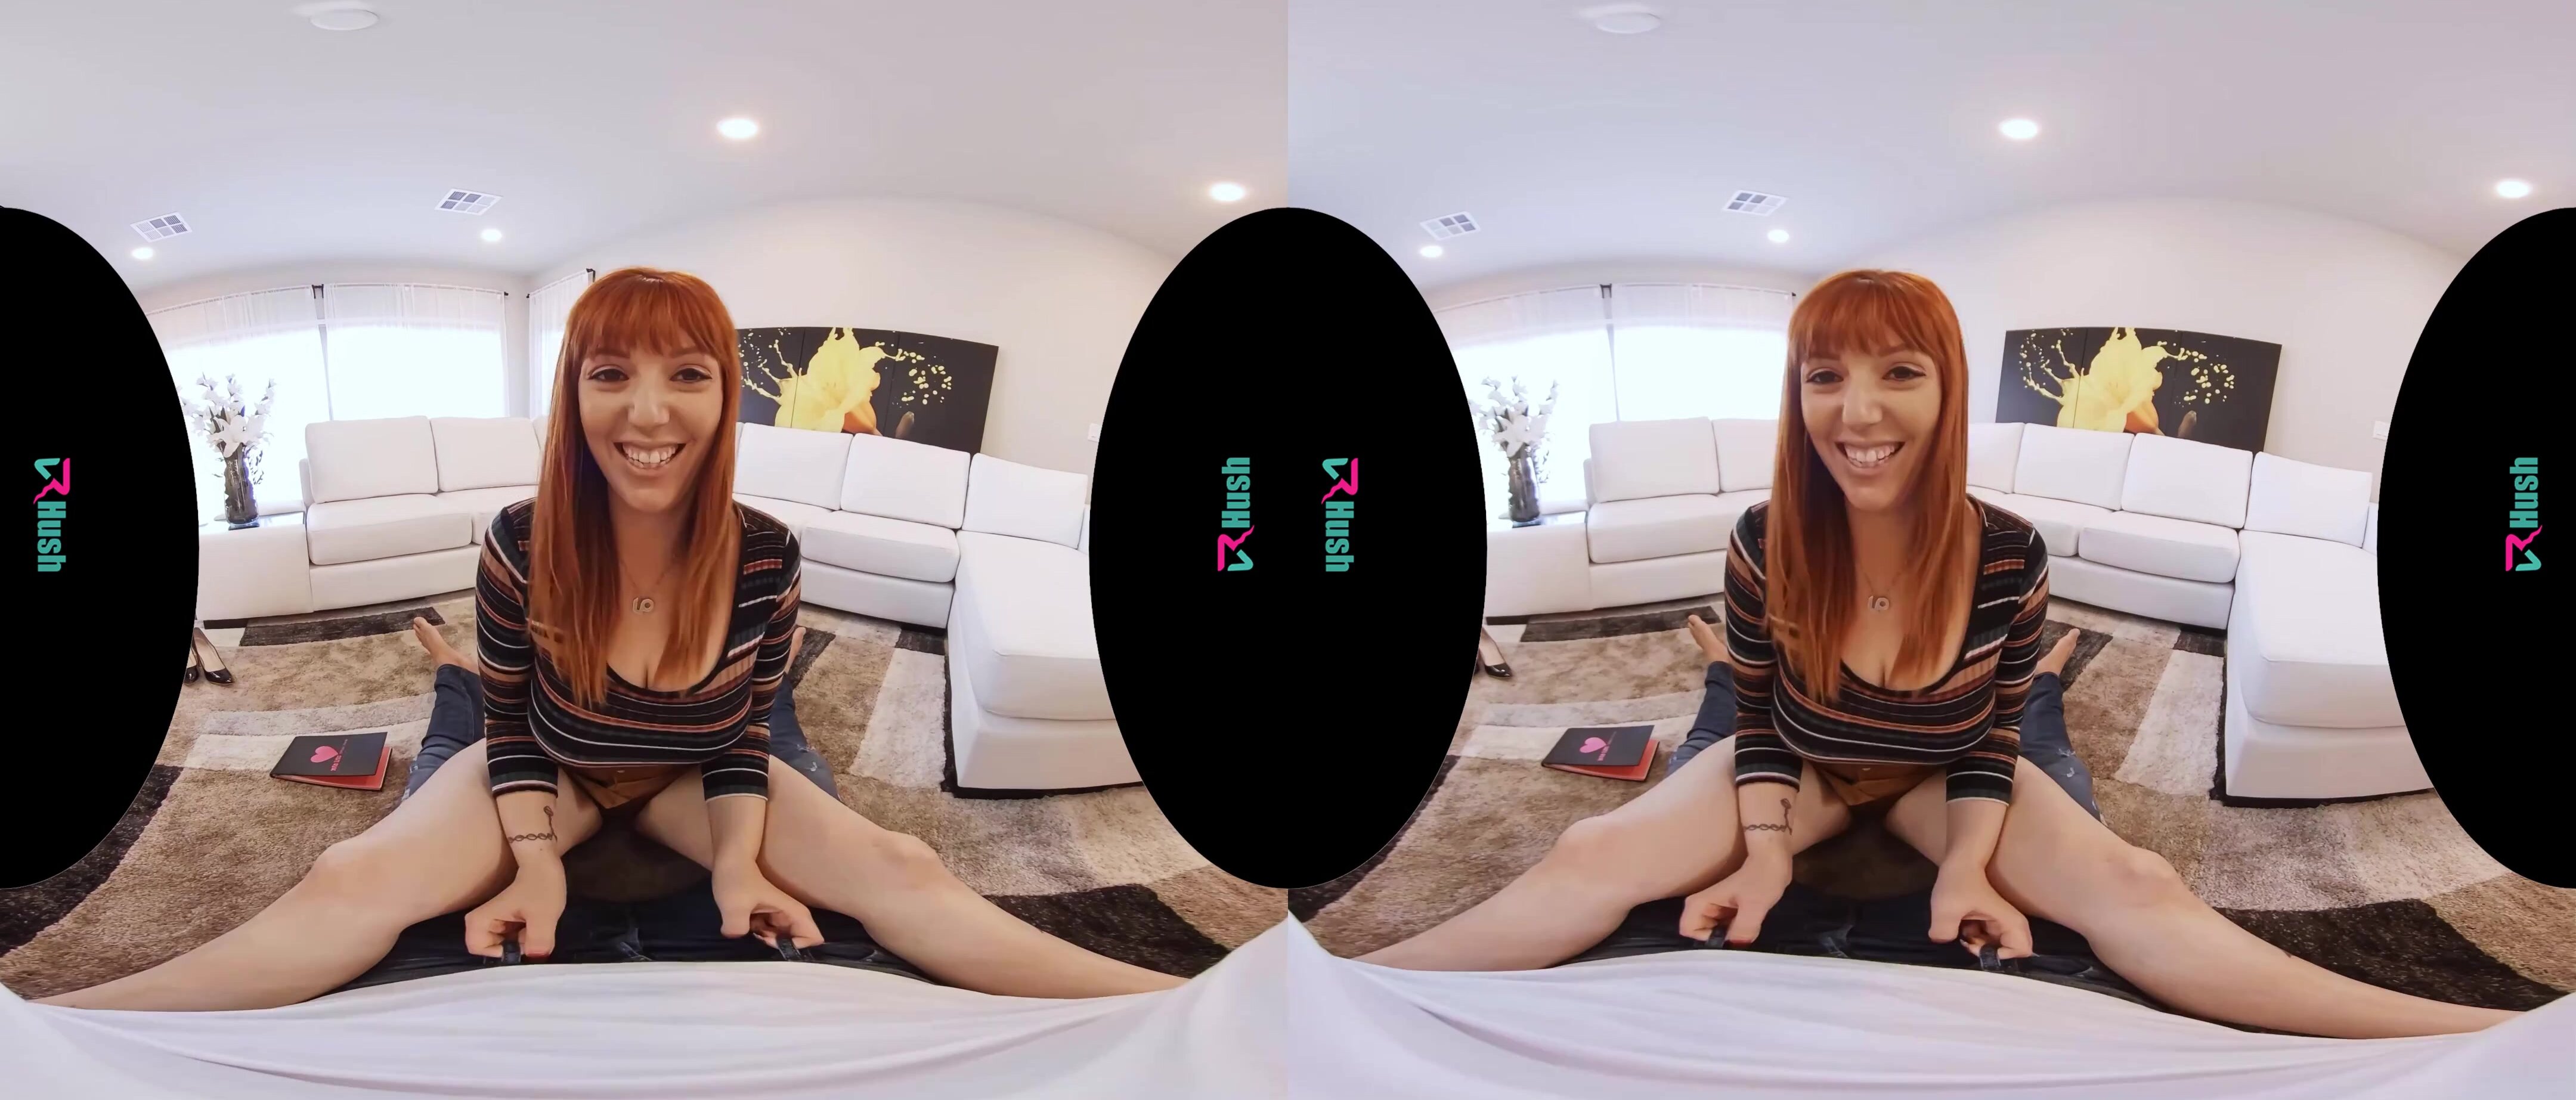 Lauren Phillips - Have You Played Sexy Madlibs Before? in 4K